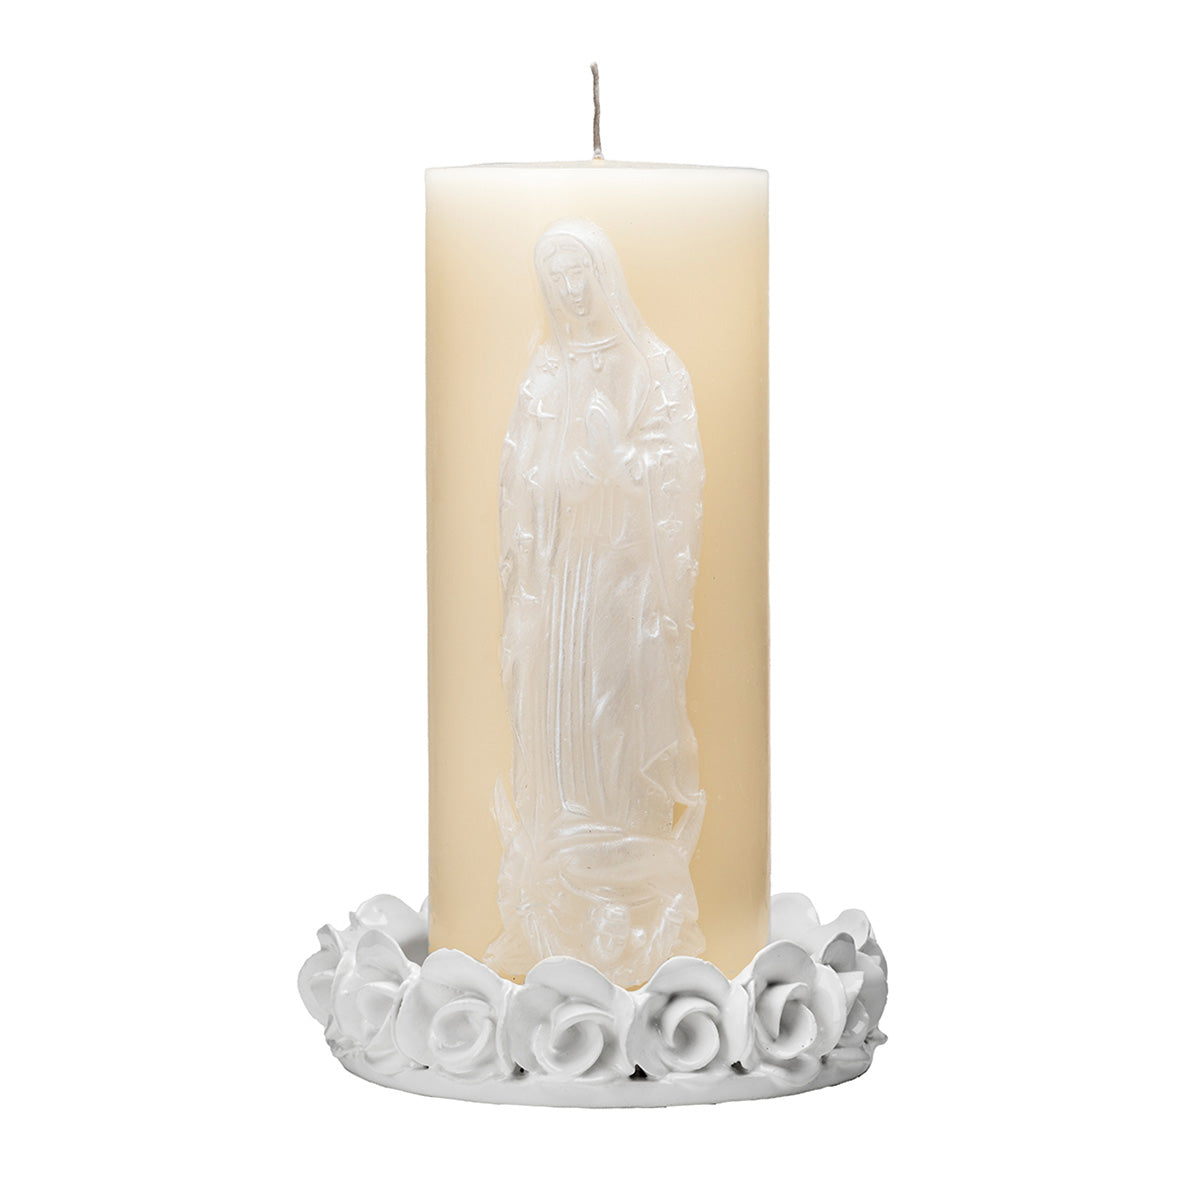 Virgin of Guadalupe candle with ceramic base